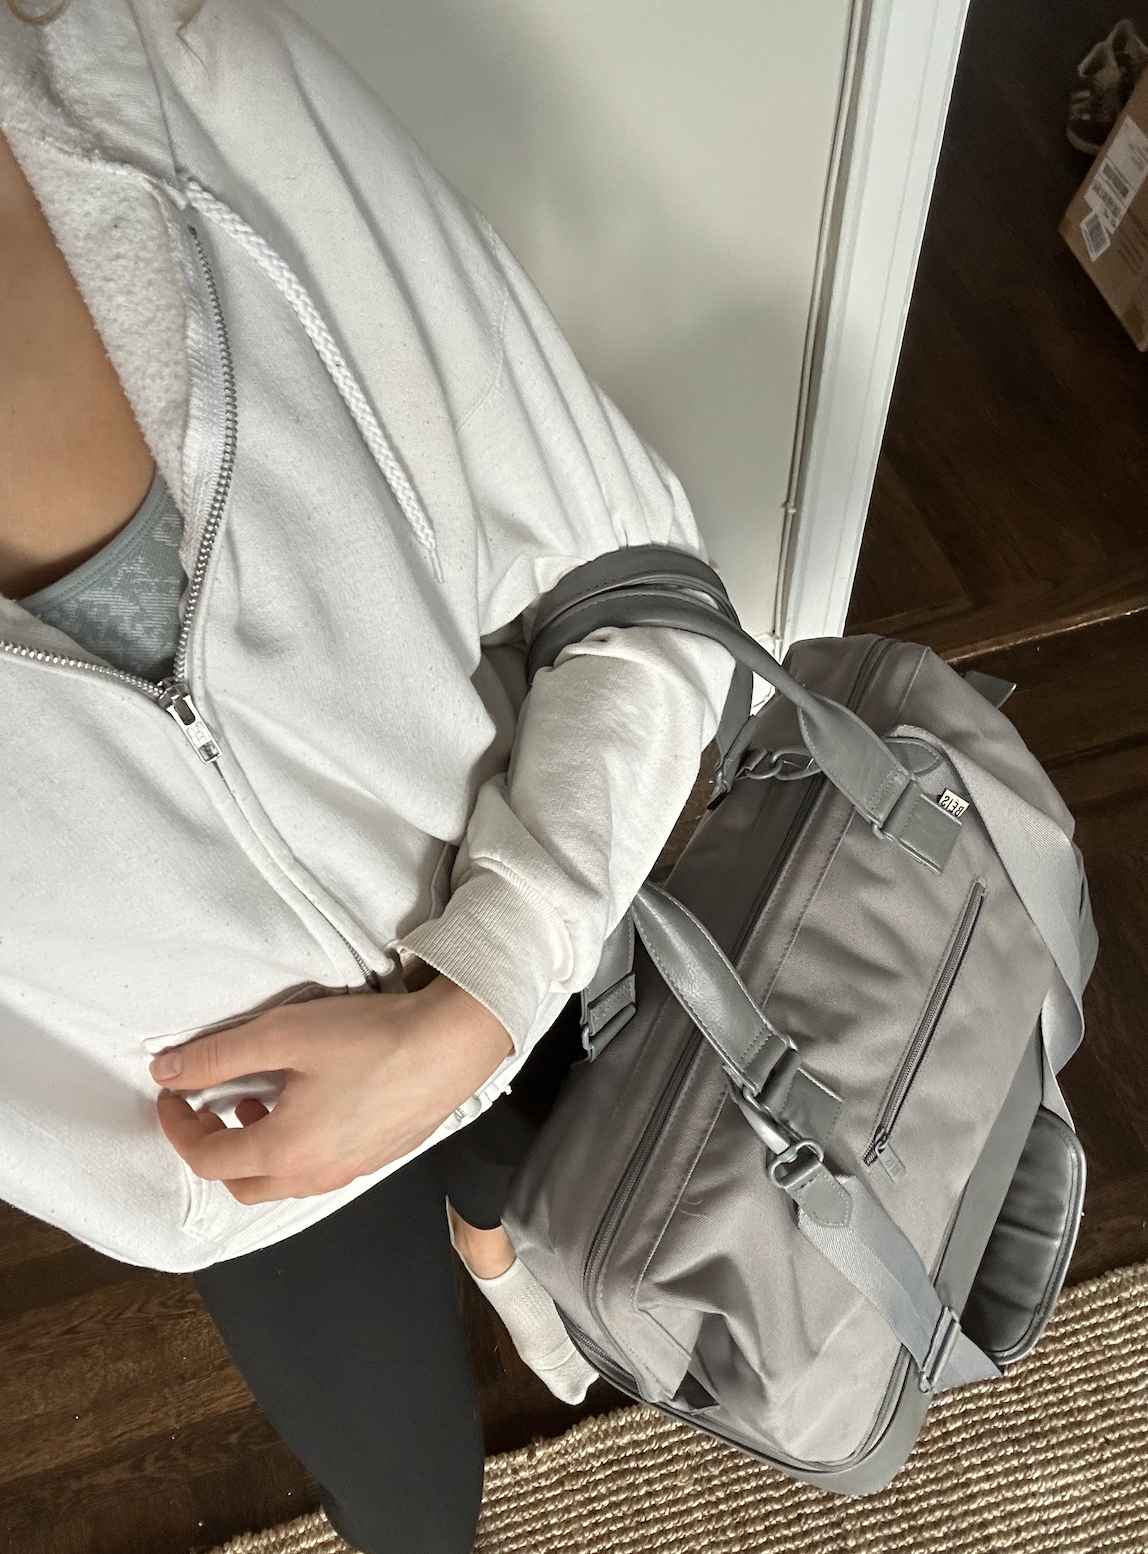 Abbey holding the gray weekender bag